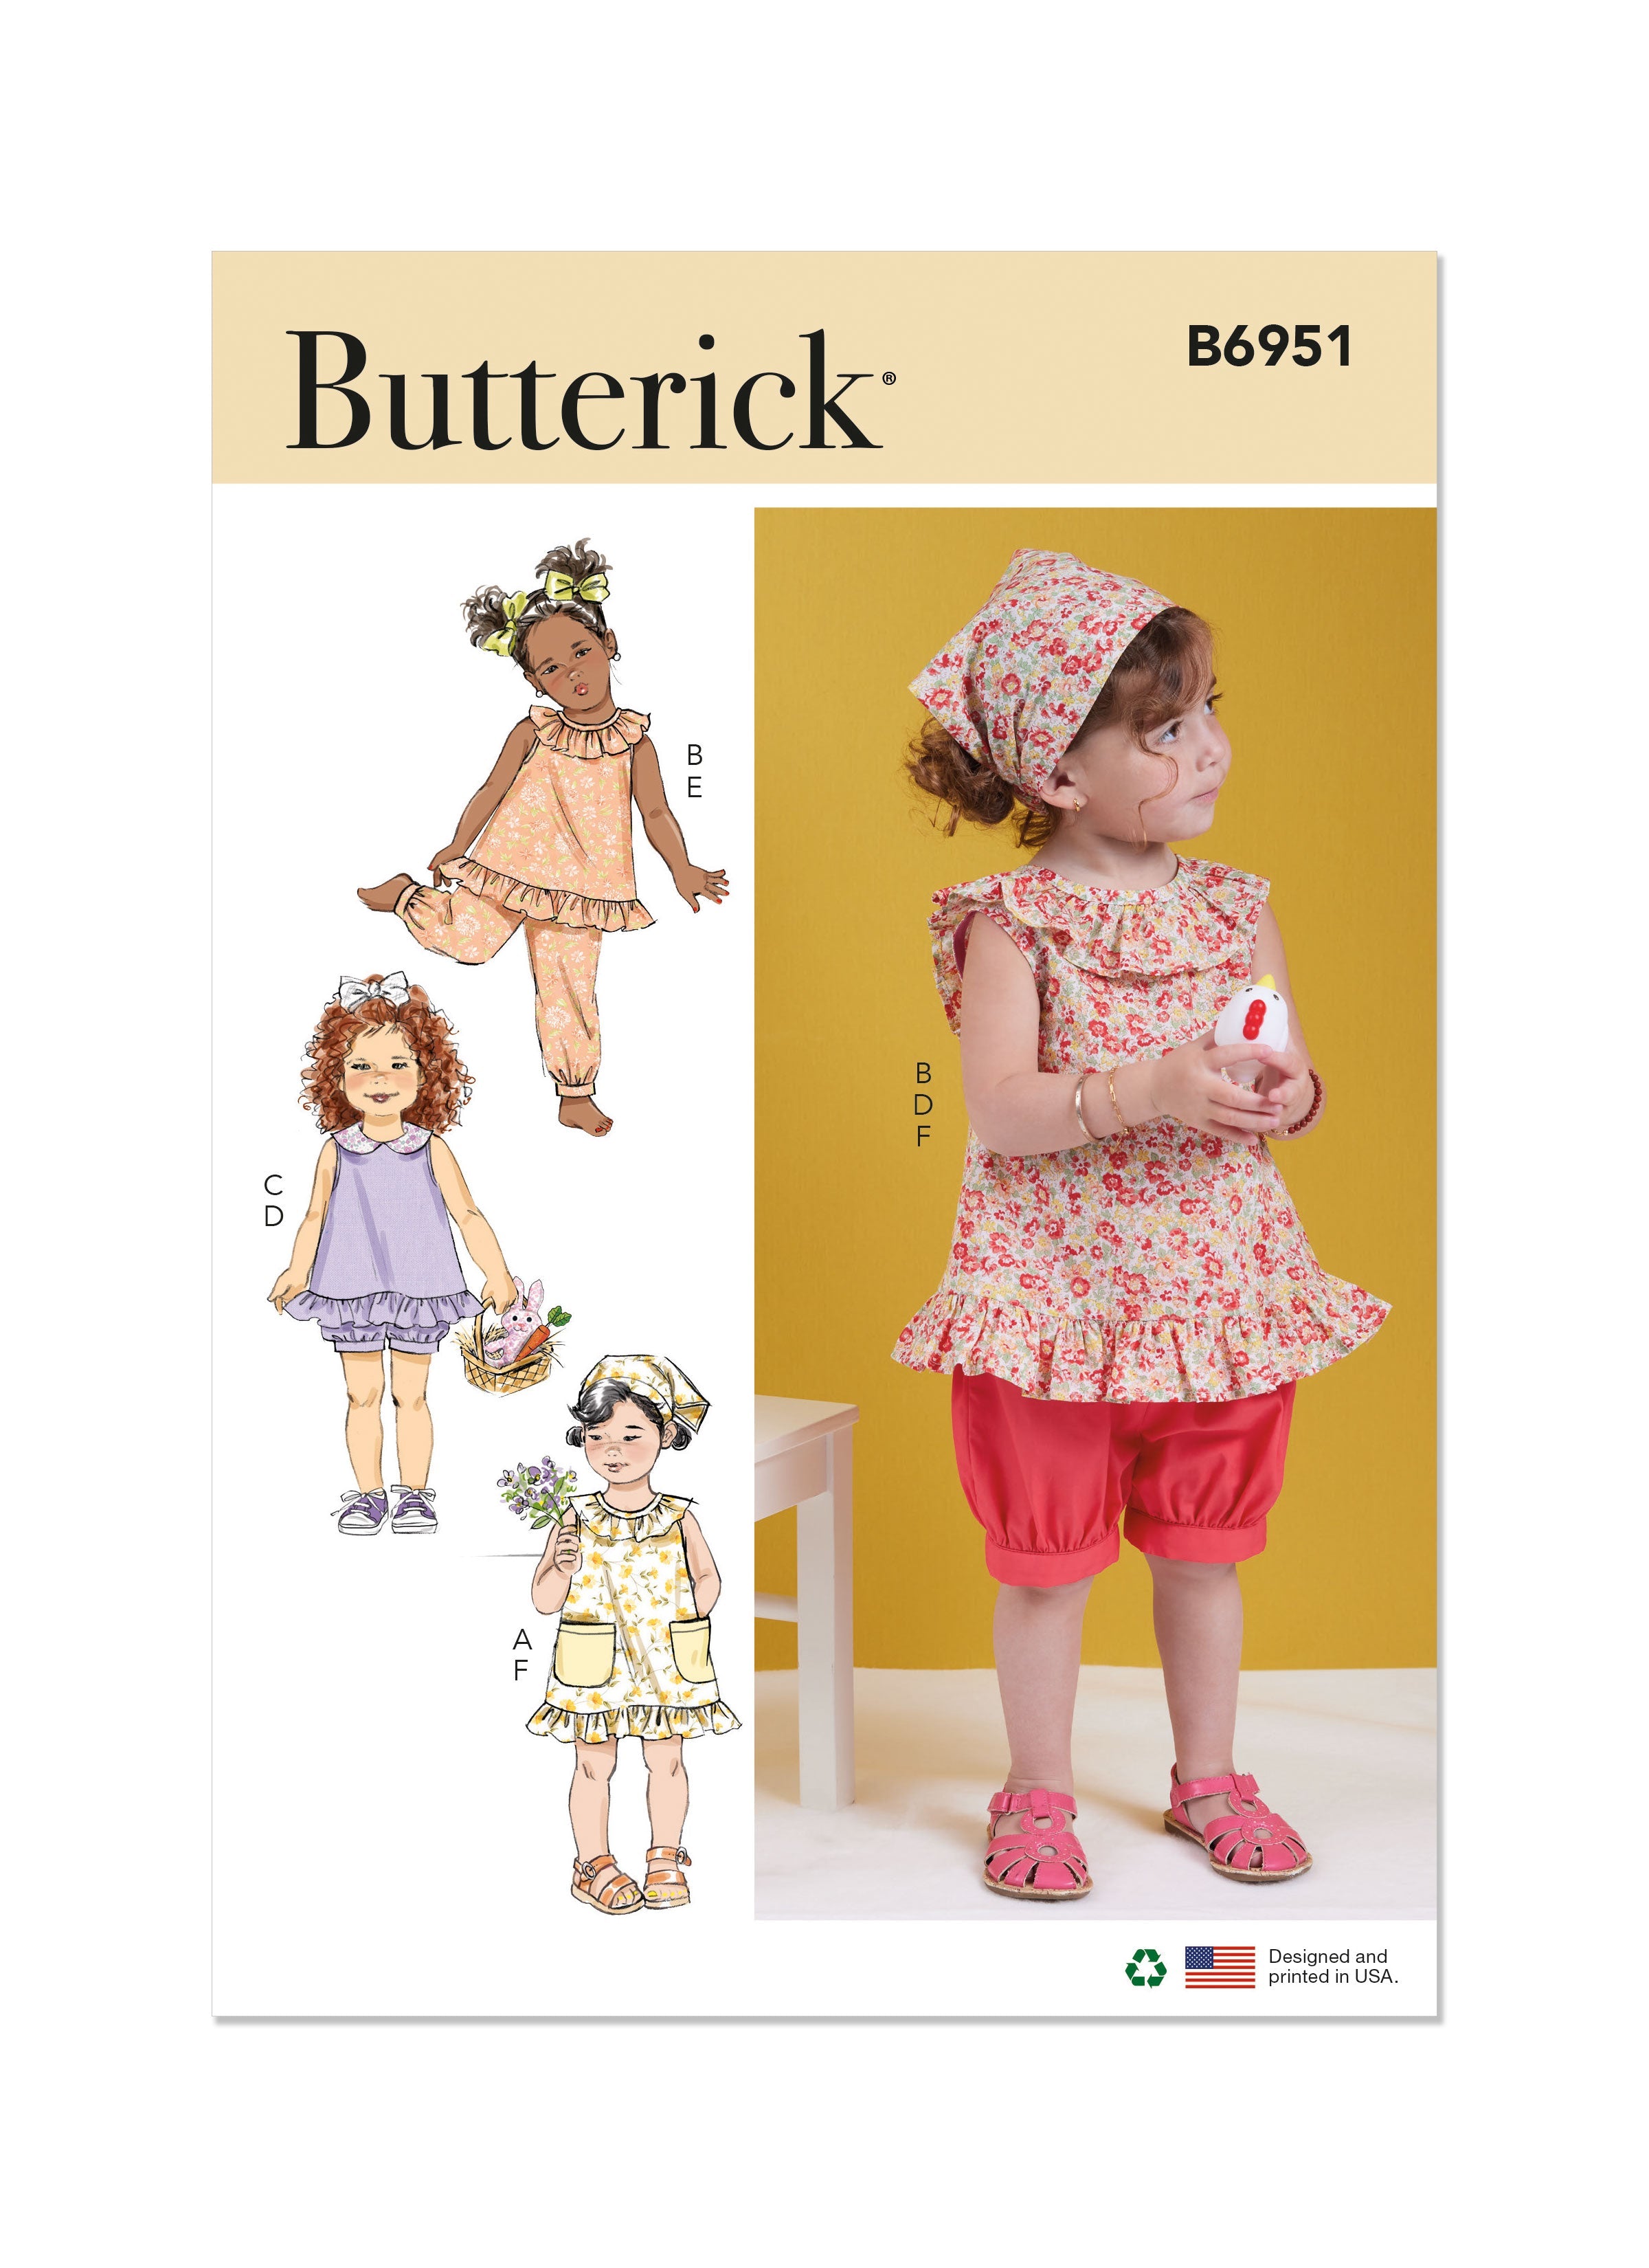 Butterick sewing pattern 6951 Toddlers' Dress, Tops, Shorts, Pants and Kerchief from Jaycotts Sewing Supplies